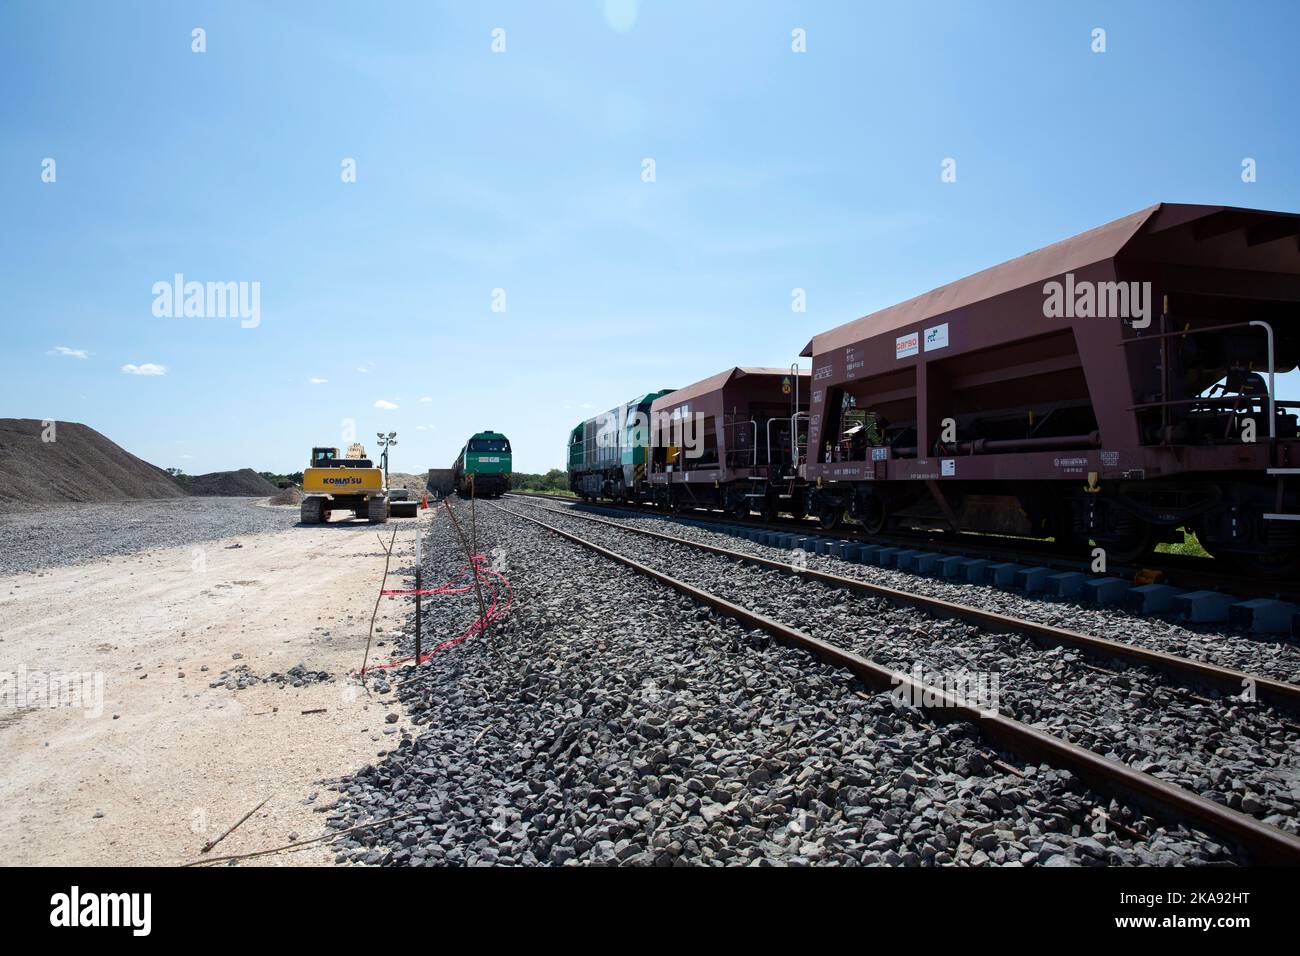 Construction of section 2 (Escárcega-Calkiní Section) of the Mayan Train project between Pomuch and Tenabo, Campeche state, Mexico on October 23, 2022. The route covers 235 km, going from Escárcega to Calkiní in the state of Campeche. The Maya Train project is one of Mexican President Andrés Manuel López Obrador’s flagship development projects. Its 1,525-km route will run through five states (Tabasco, Chiapas, Campeche, Yucatán and Quintana Roo states), linking Maya temples like Palenque, Chichen Itzá and Calakmul, the colonial city of Mérida, beach resorts of Cancún, Playa del Carmen and Tulu Stock Photo